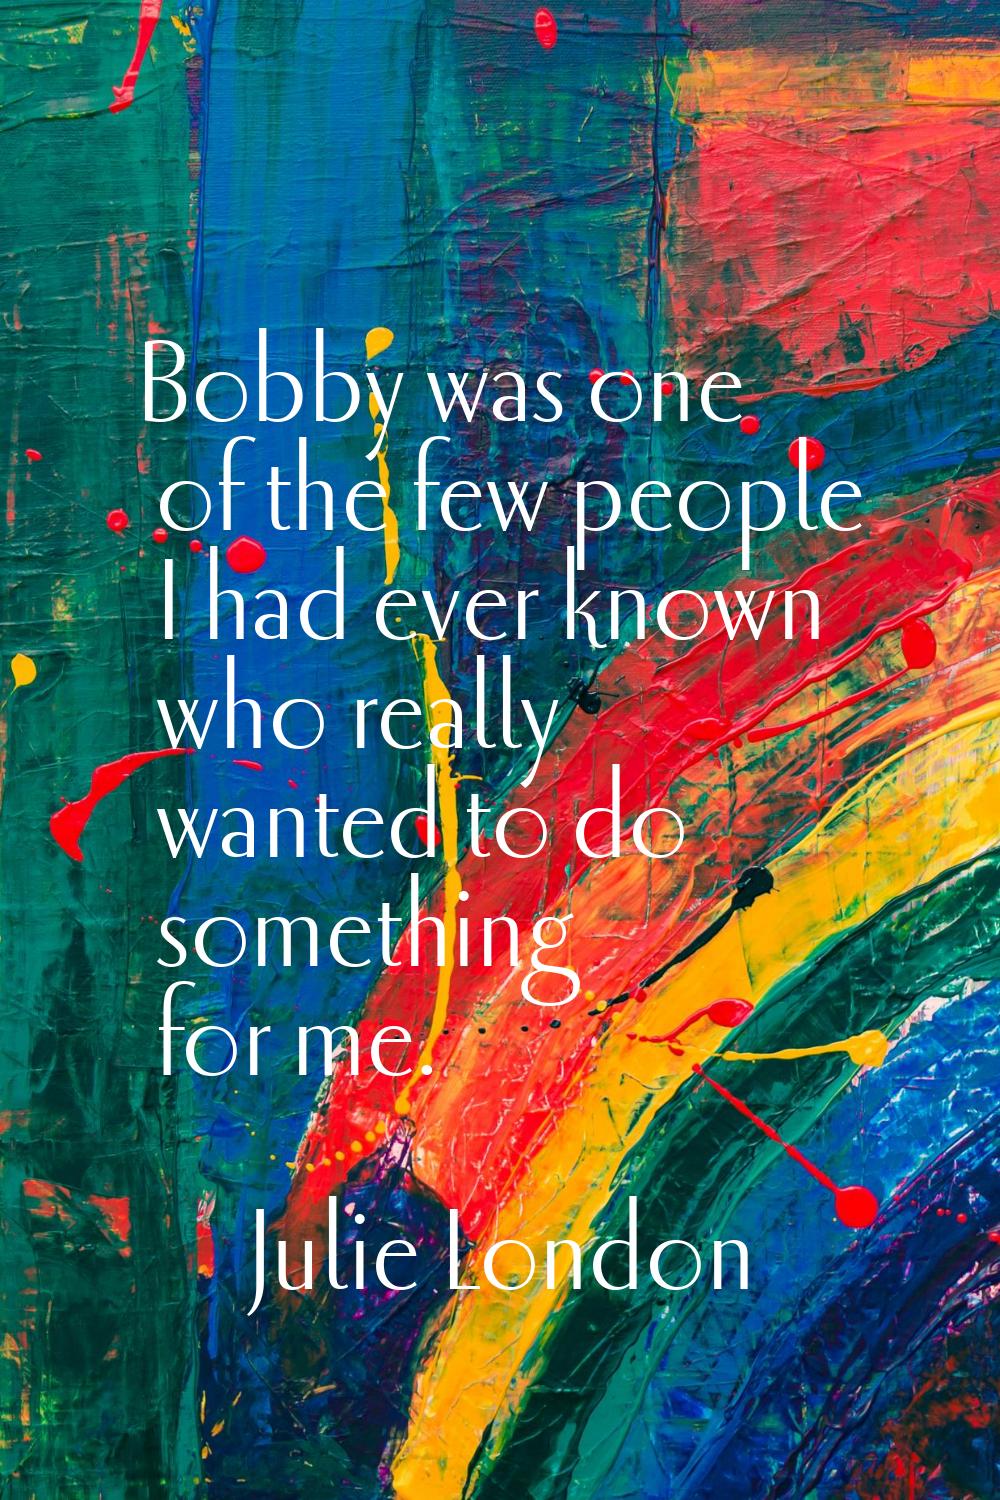 Bobby was one of the few people I had ever known who really wanted to do something for me.